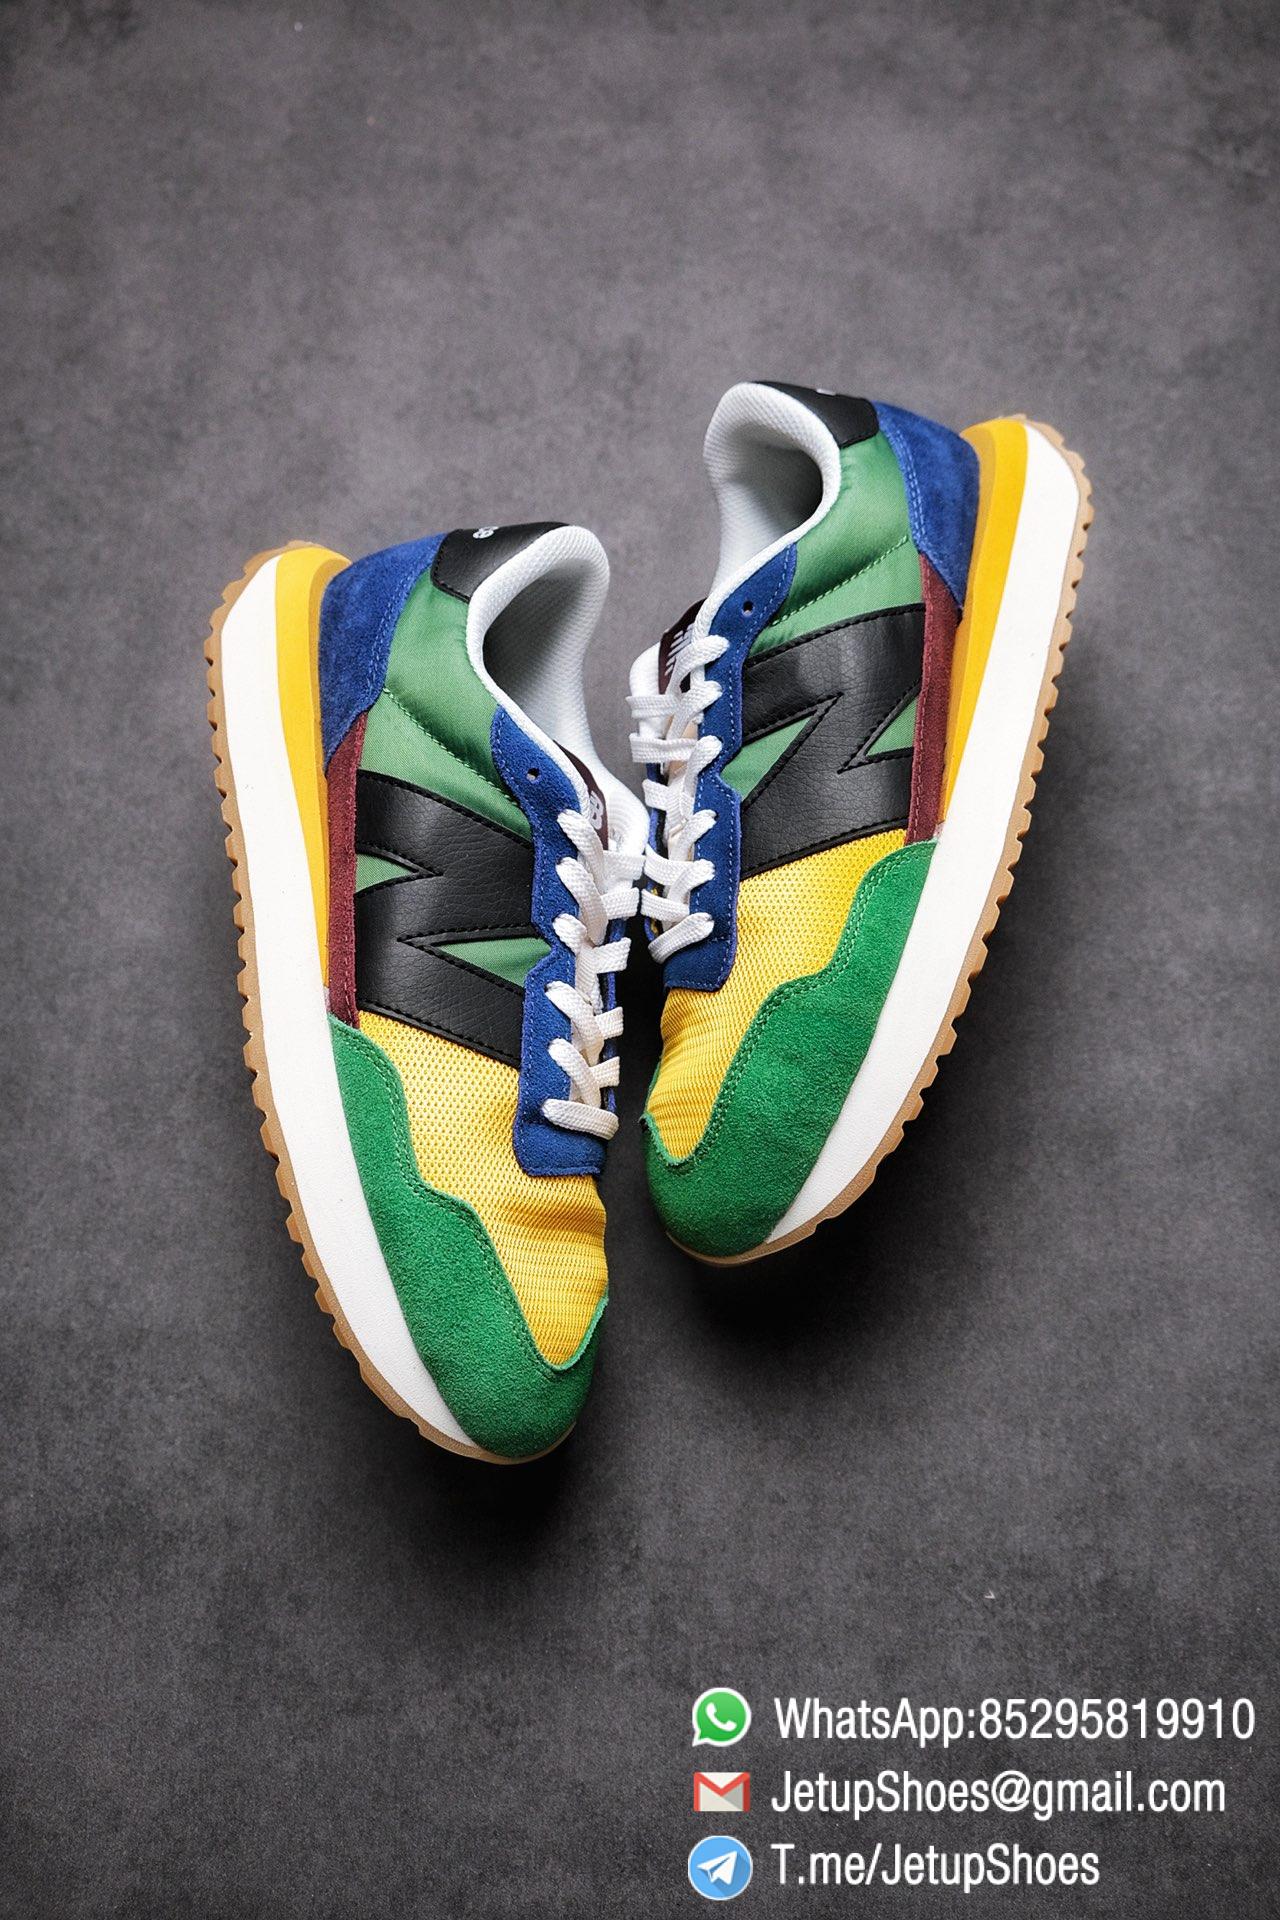 Best Replica New Balance 237 Green Blue Yellow Multi Color SKU MS237LB1 High Quality Fake Running Shoes 03